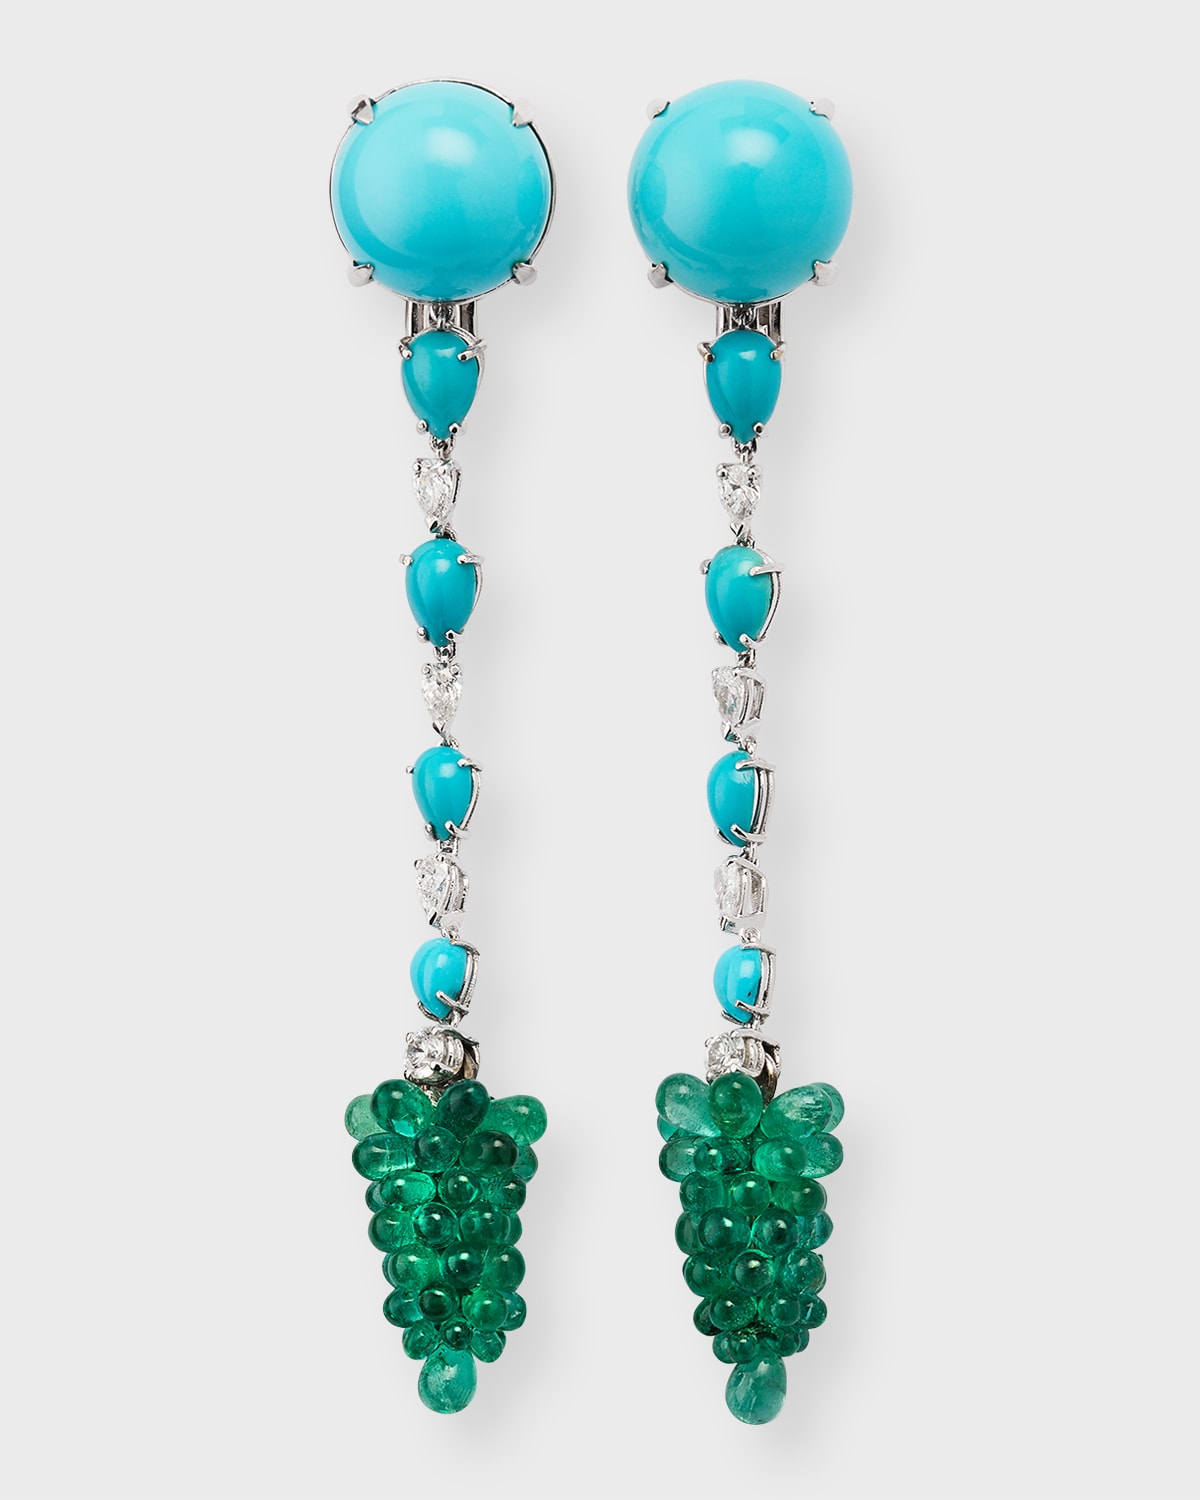 Staurino 18k White Gold Spaghetti Earrings With Turquoise, Diamonds And Emeralds